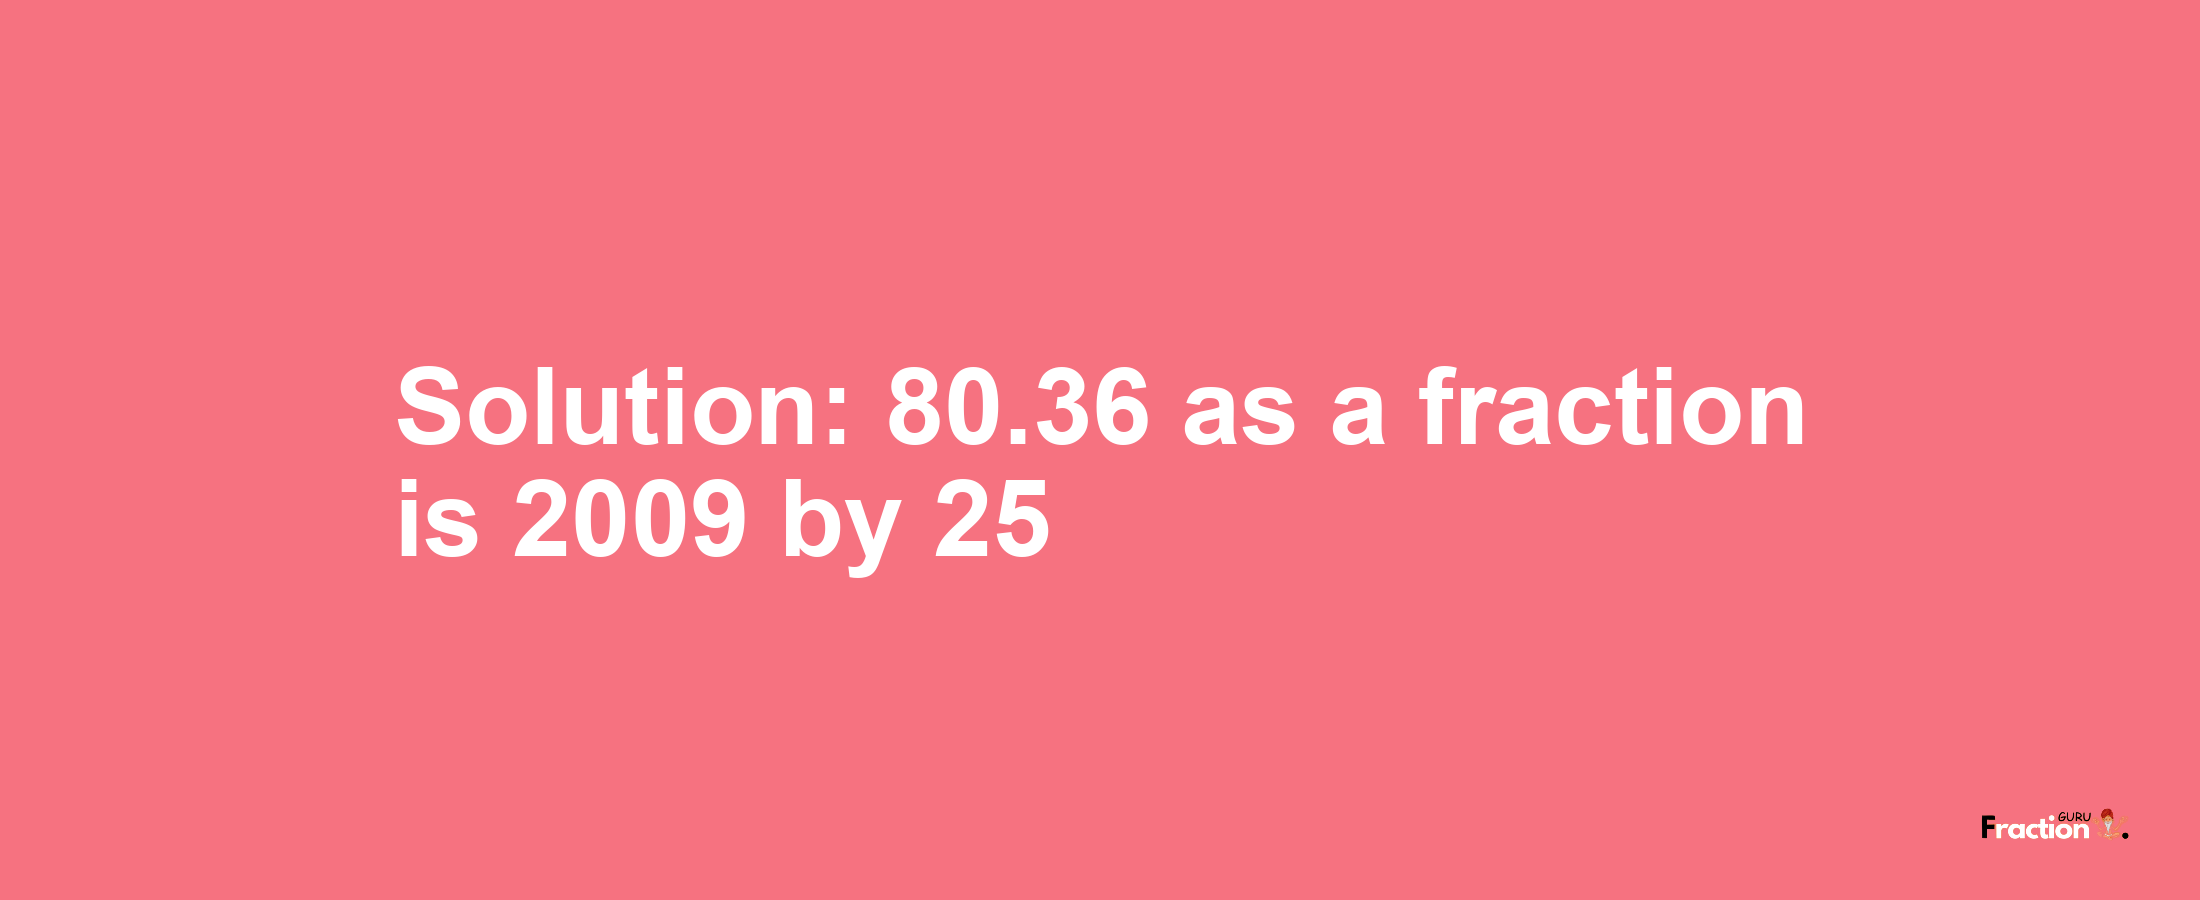 Solution:80.36 as a fraction is 2009/25